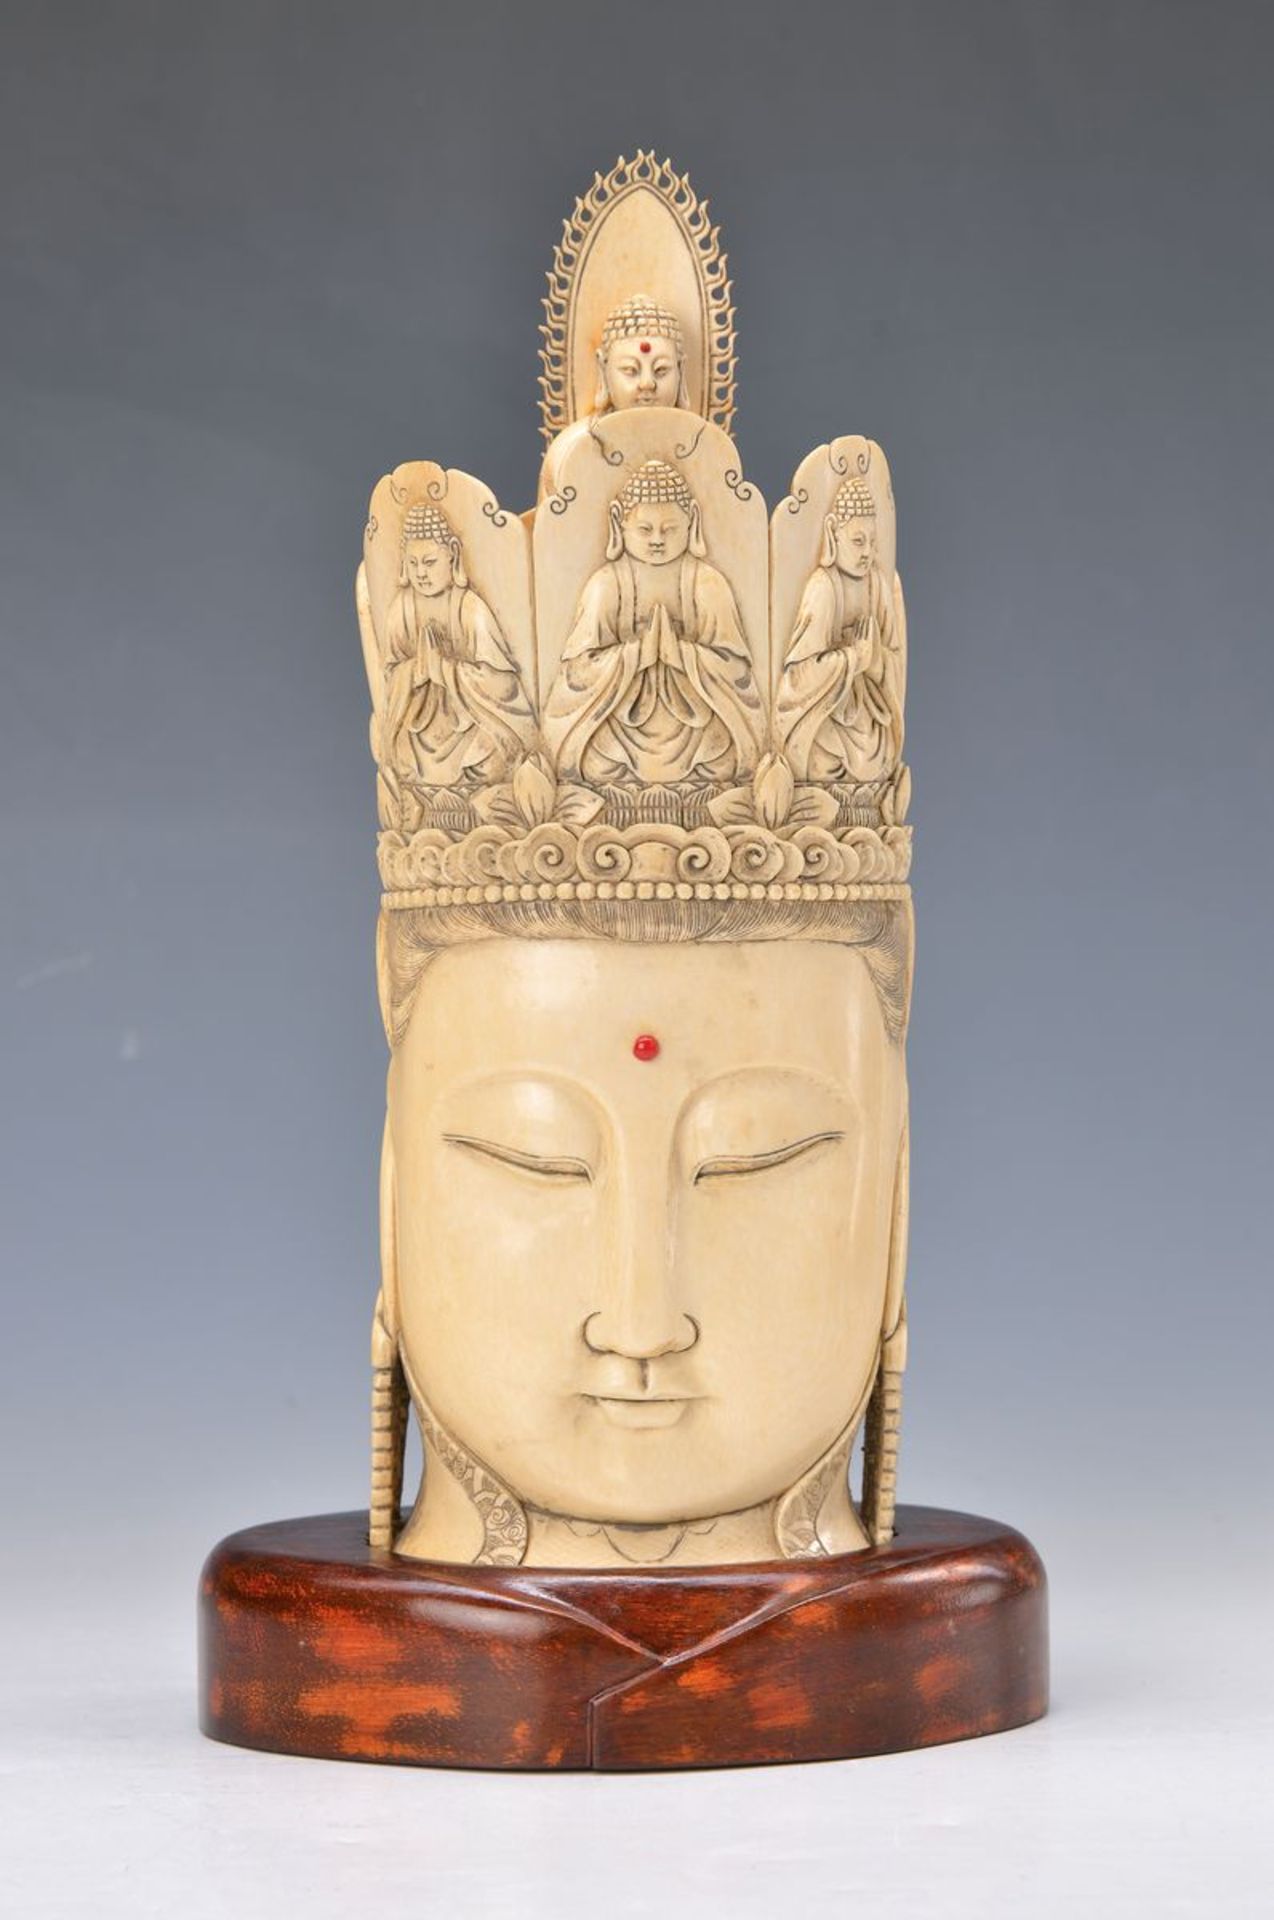 Large Buddha head, China, around 1900, heavy Ivory, finely carved facial features, crown with